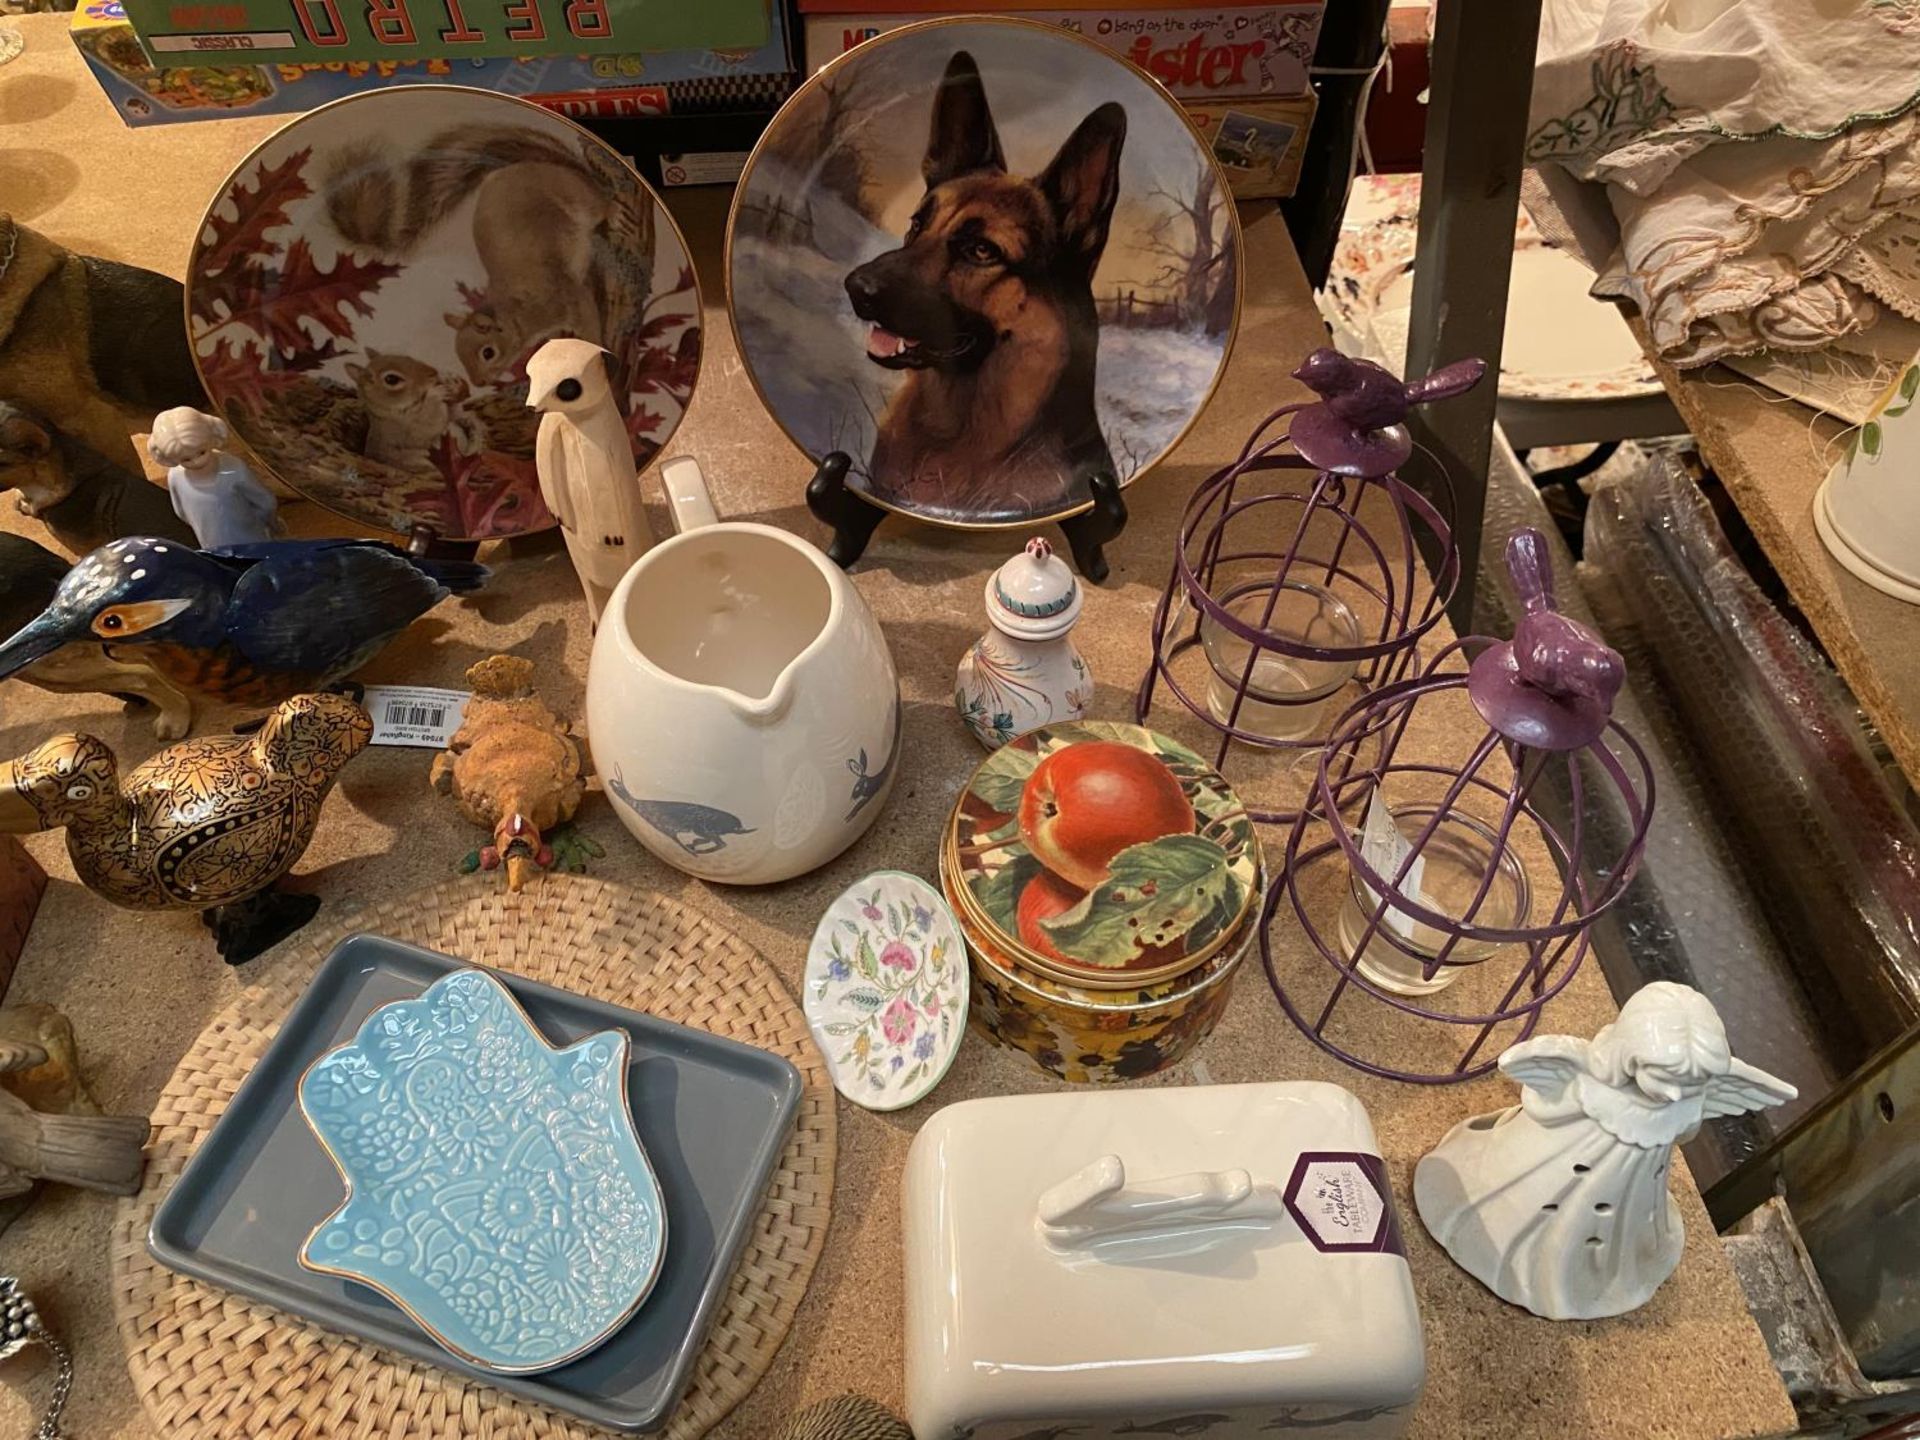 A LARGE COLLECTION OF ITEMS TO INCLUDE SEVERAL ANIMAL FIGURINES, DECORATIVE PLATES AND TRINKET - Image 3 of 6